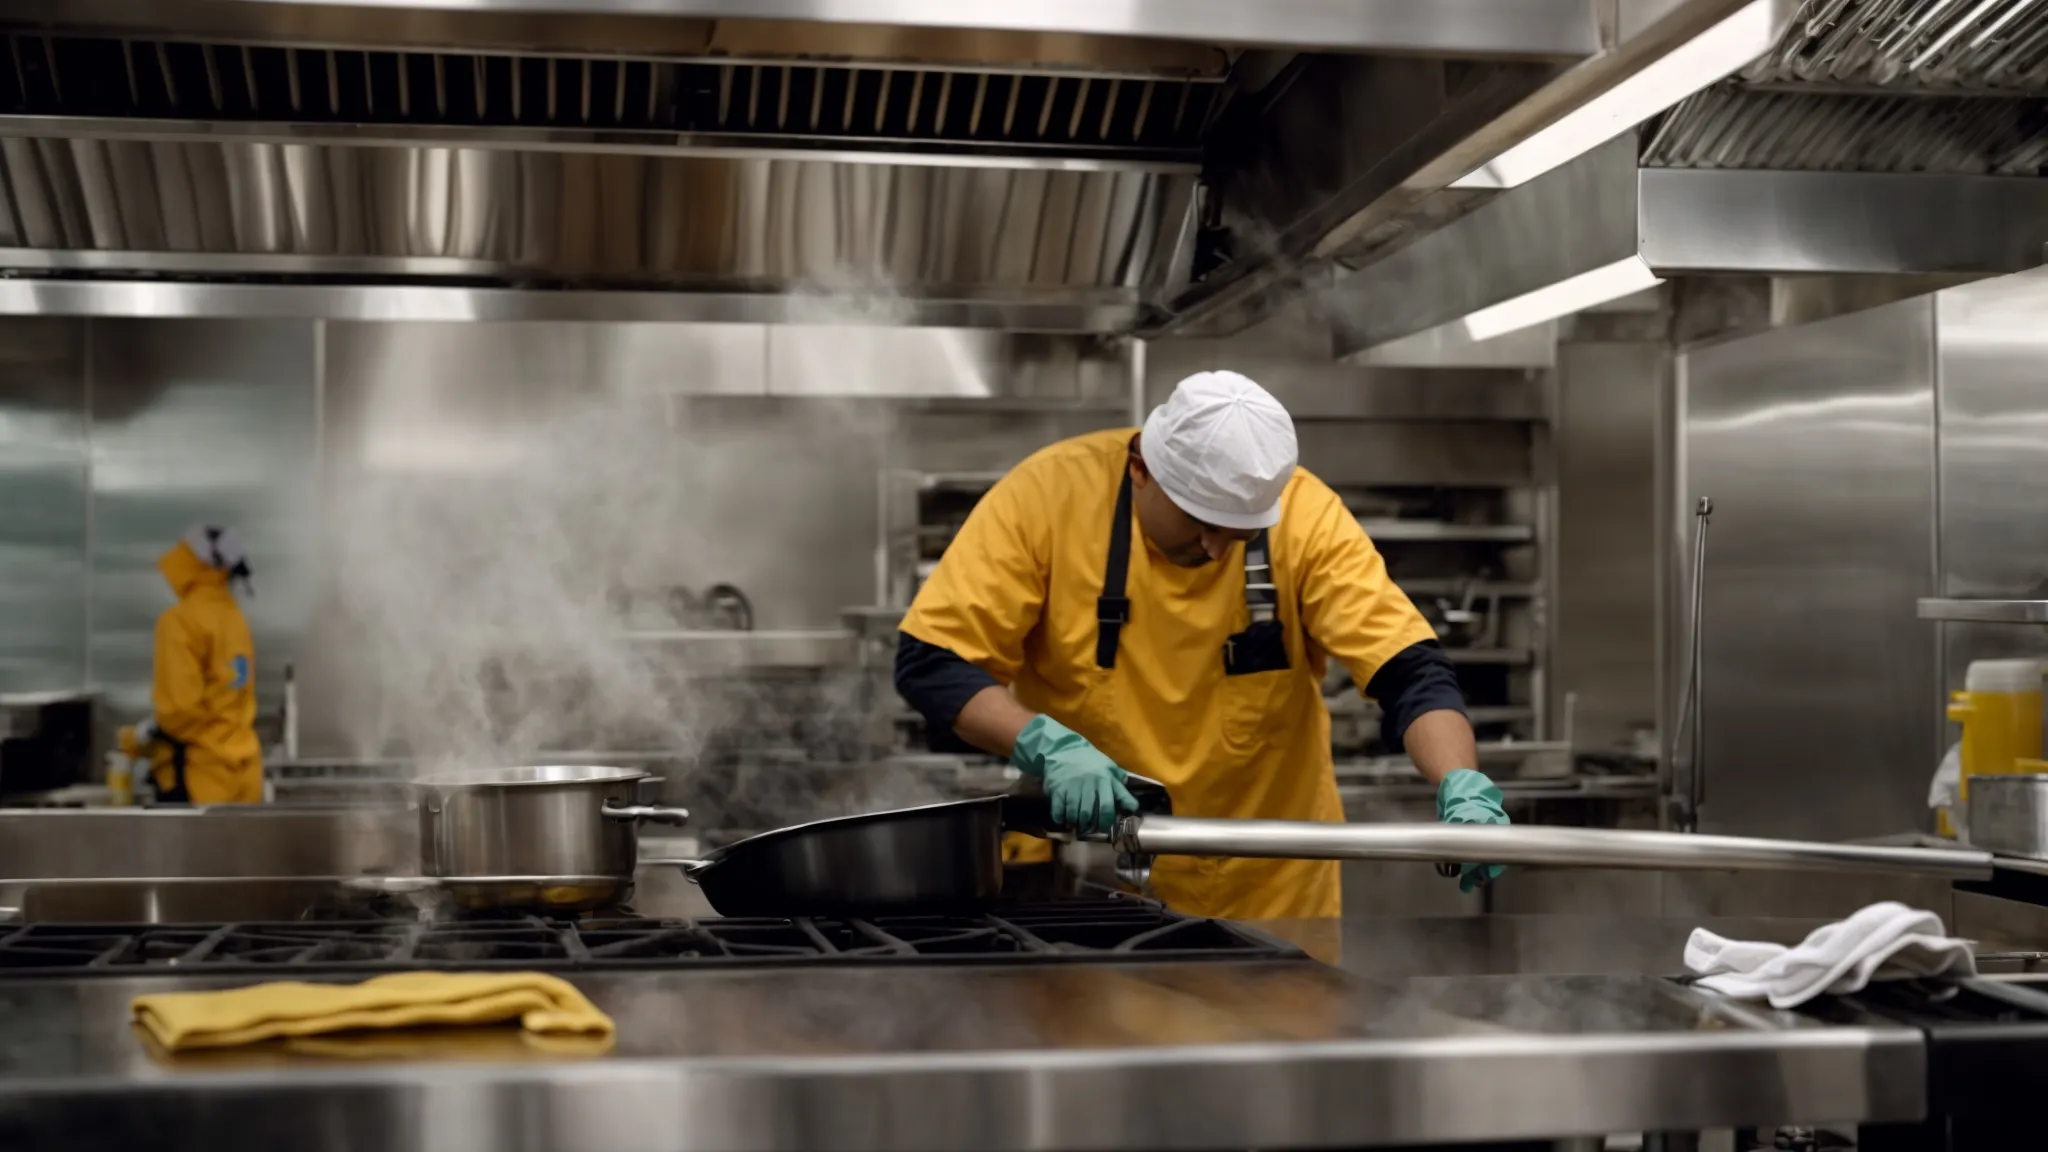 a professional cleaning crew diligently scrubs and vacuums the hood and exhaust system above a commercial kitchen stove, targeting not only grease but dust and carbon deposits as well.